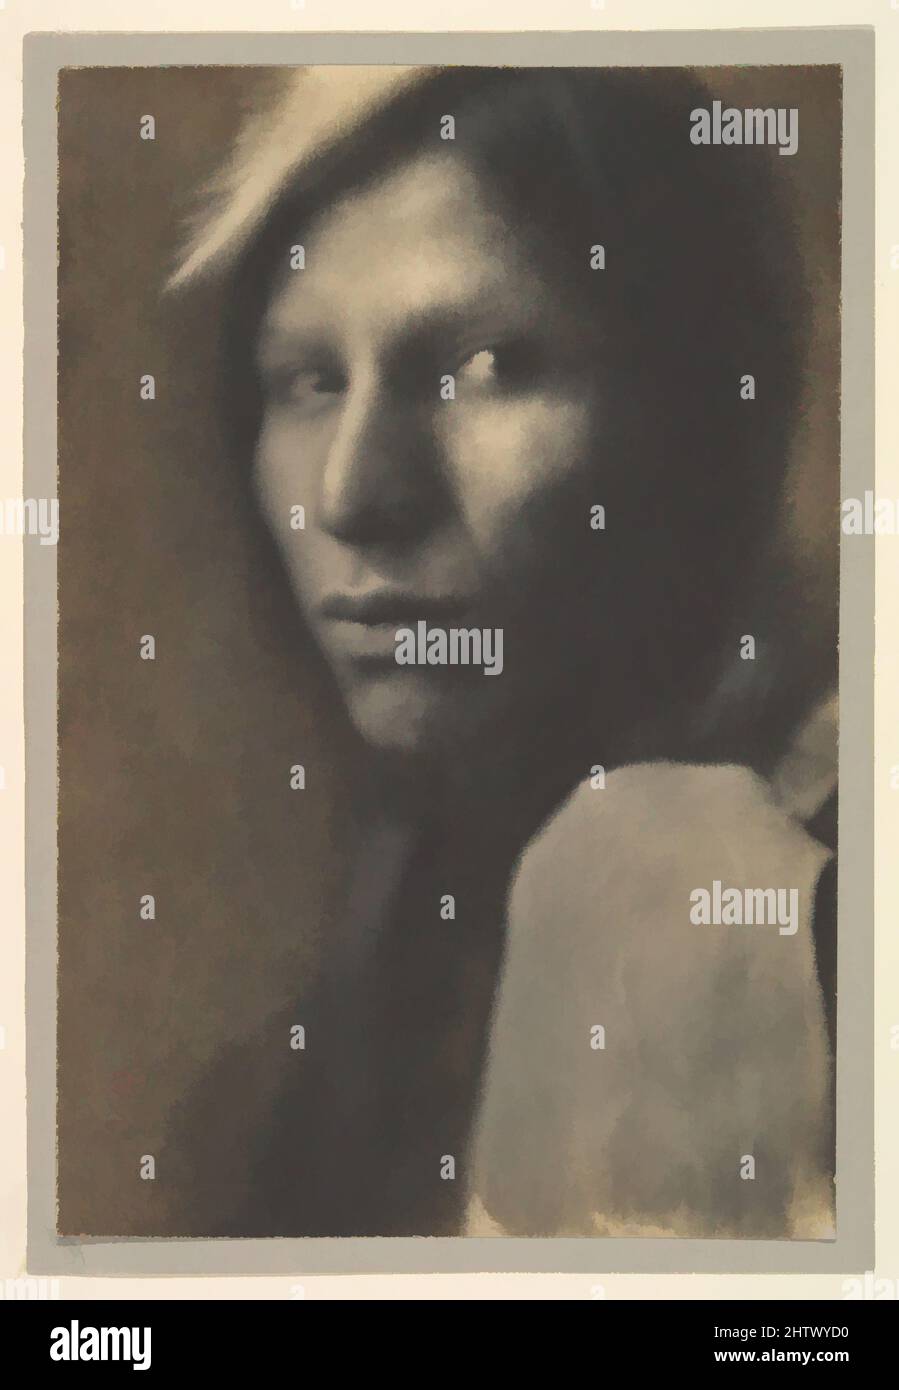 Art inspired by A Sioux Chief, 1898, Platinum print, 19.5 x 13.0 cm. (7 11/16 x 5 1/8 in.), Photographs, Joseph T. Keiley (American, 1869–1914, Classic works modernized by Artotop with a splash of modernity. Shapes, color and value, eye-catching visual impact on art. Emotions through freedom of artworks in a contemporary way. A timeless message pursuing a wildly creative new direction. Artists turning to the digital medium and creating the Artotop NFT Stock Photo